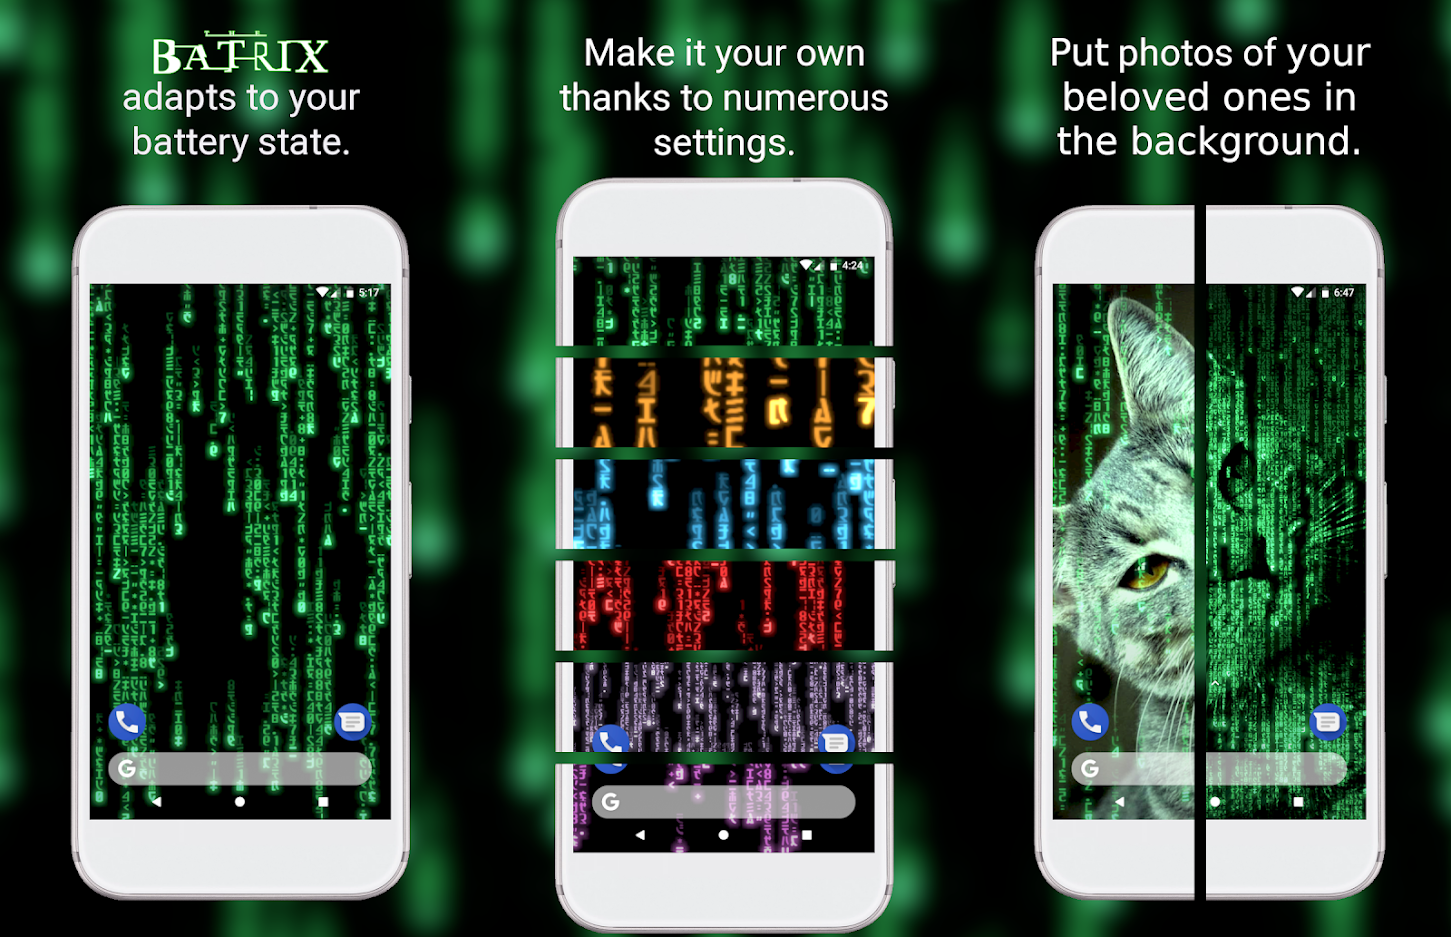 [android]-2x-matrix-themed-live-wallpapers